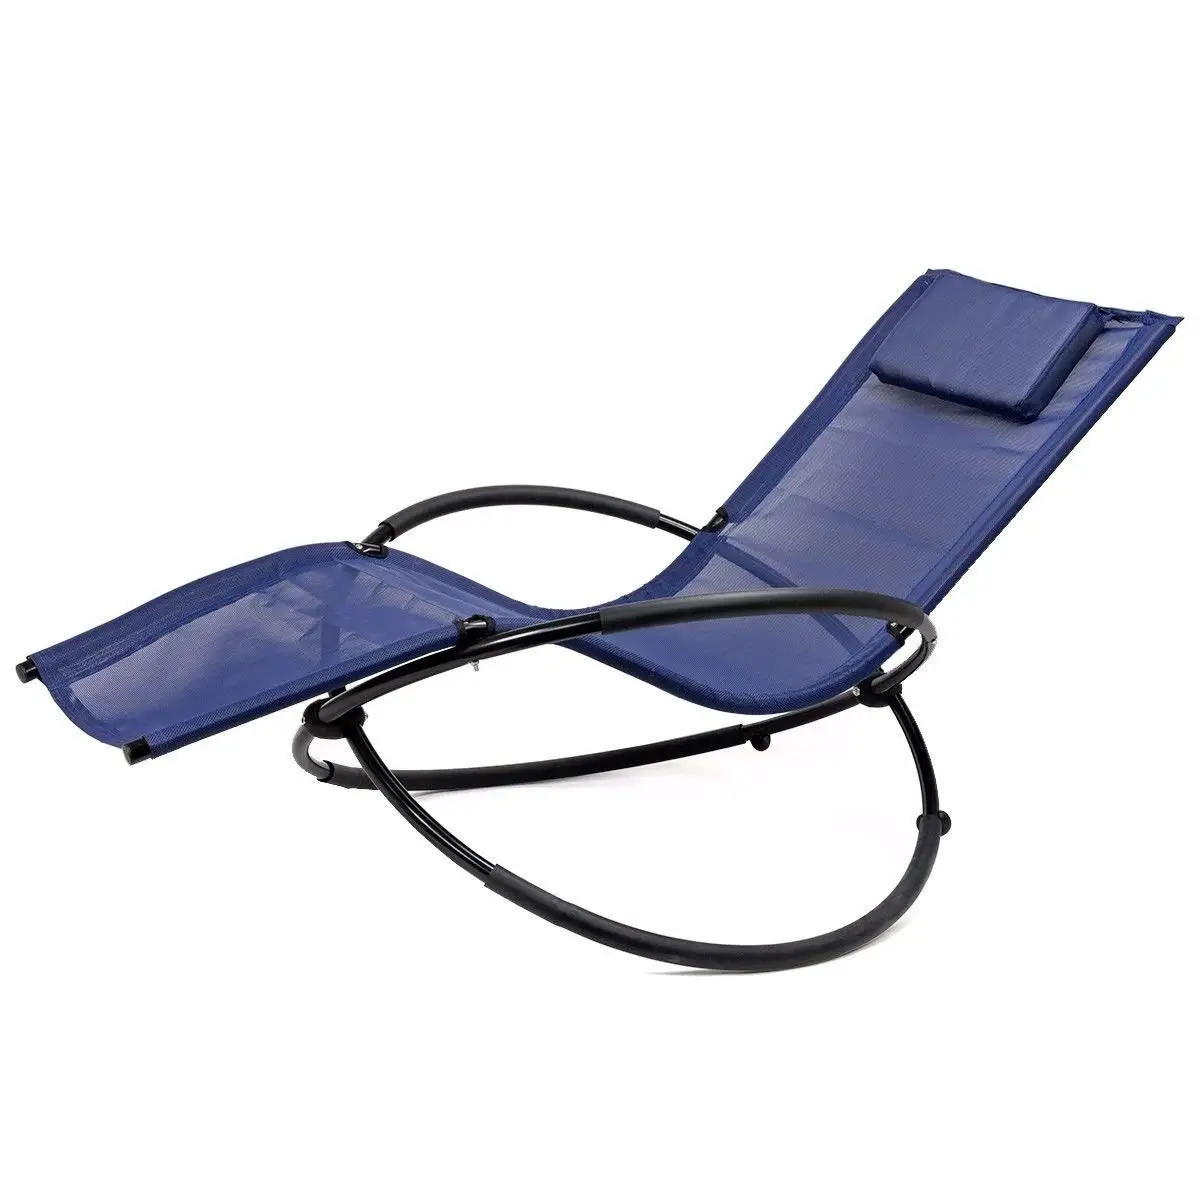 Cheap Gravity Lounger, find Gravity Lounger deals on line at Alibaba.com